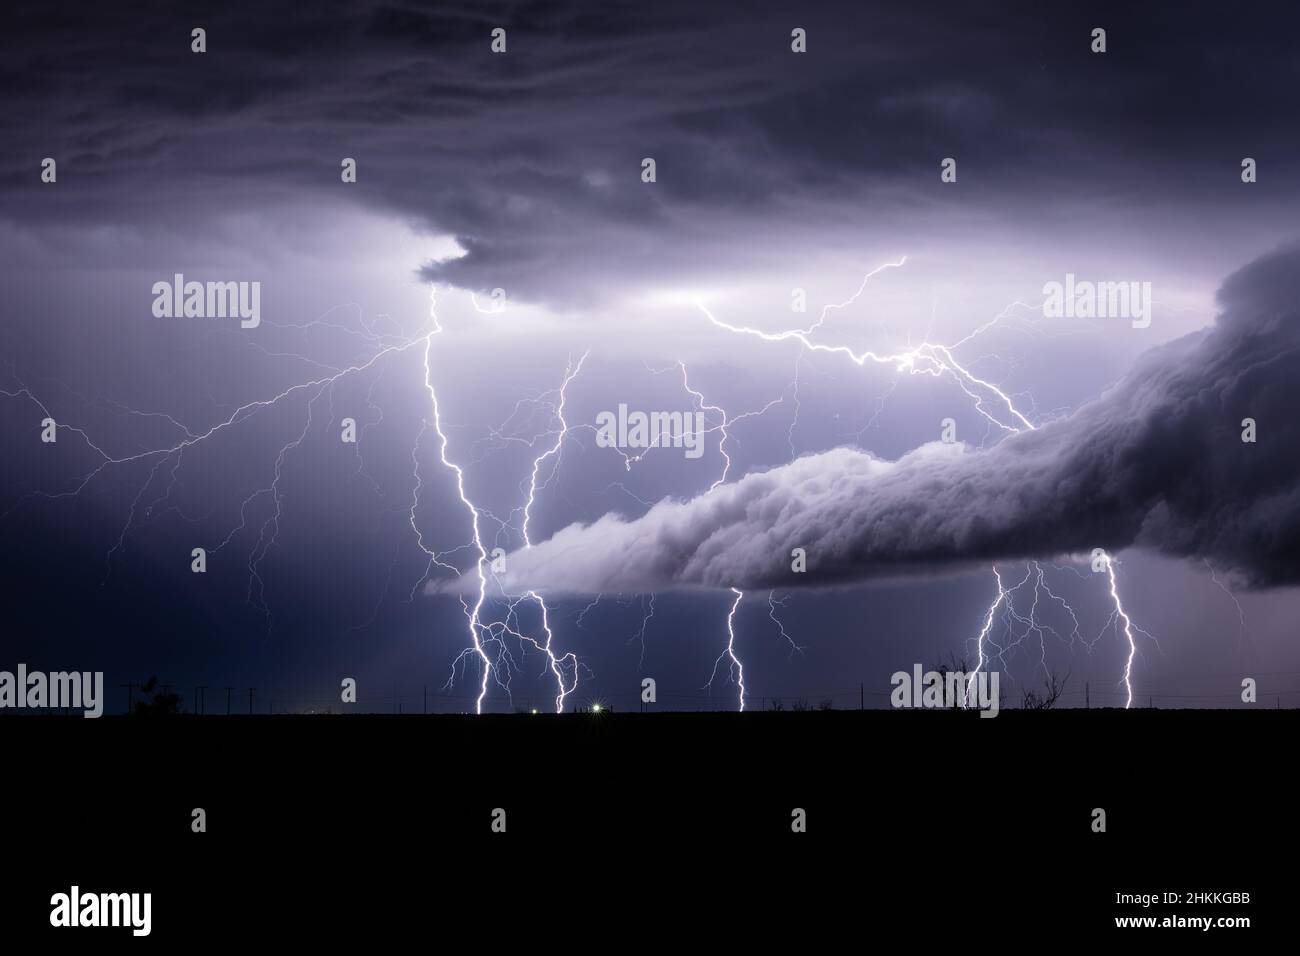 Lightning bolts strike in a storm near Hobbs, New Mexico Stock Photo